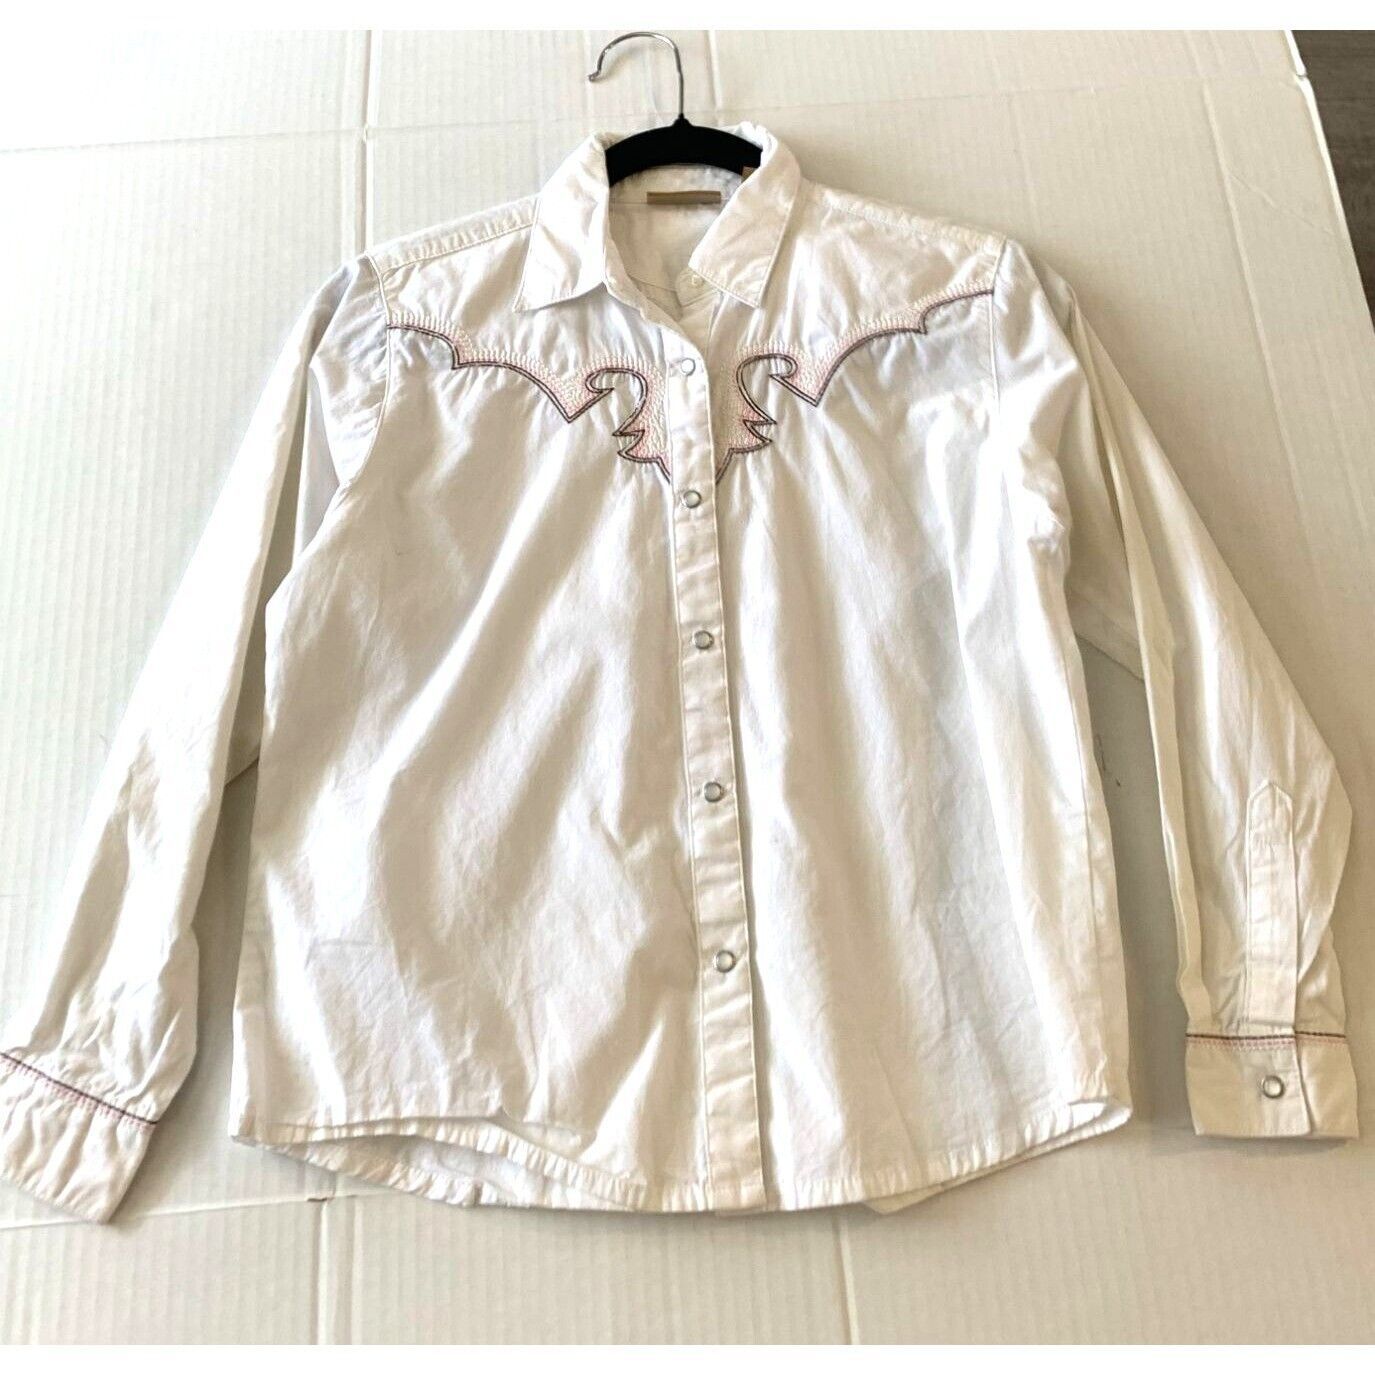 Wrangler Girls Size XXL 14 Button Up Shirt Pearl Snap Western Top White Pink Bro - $24.74